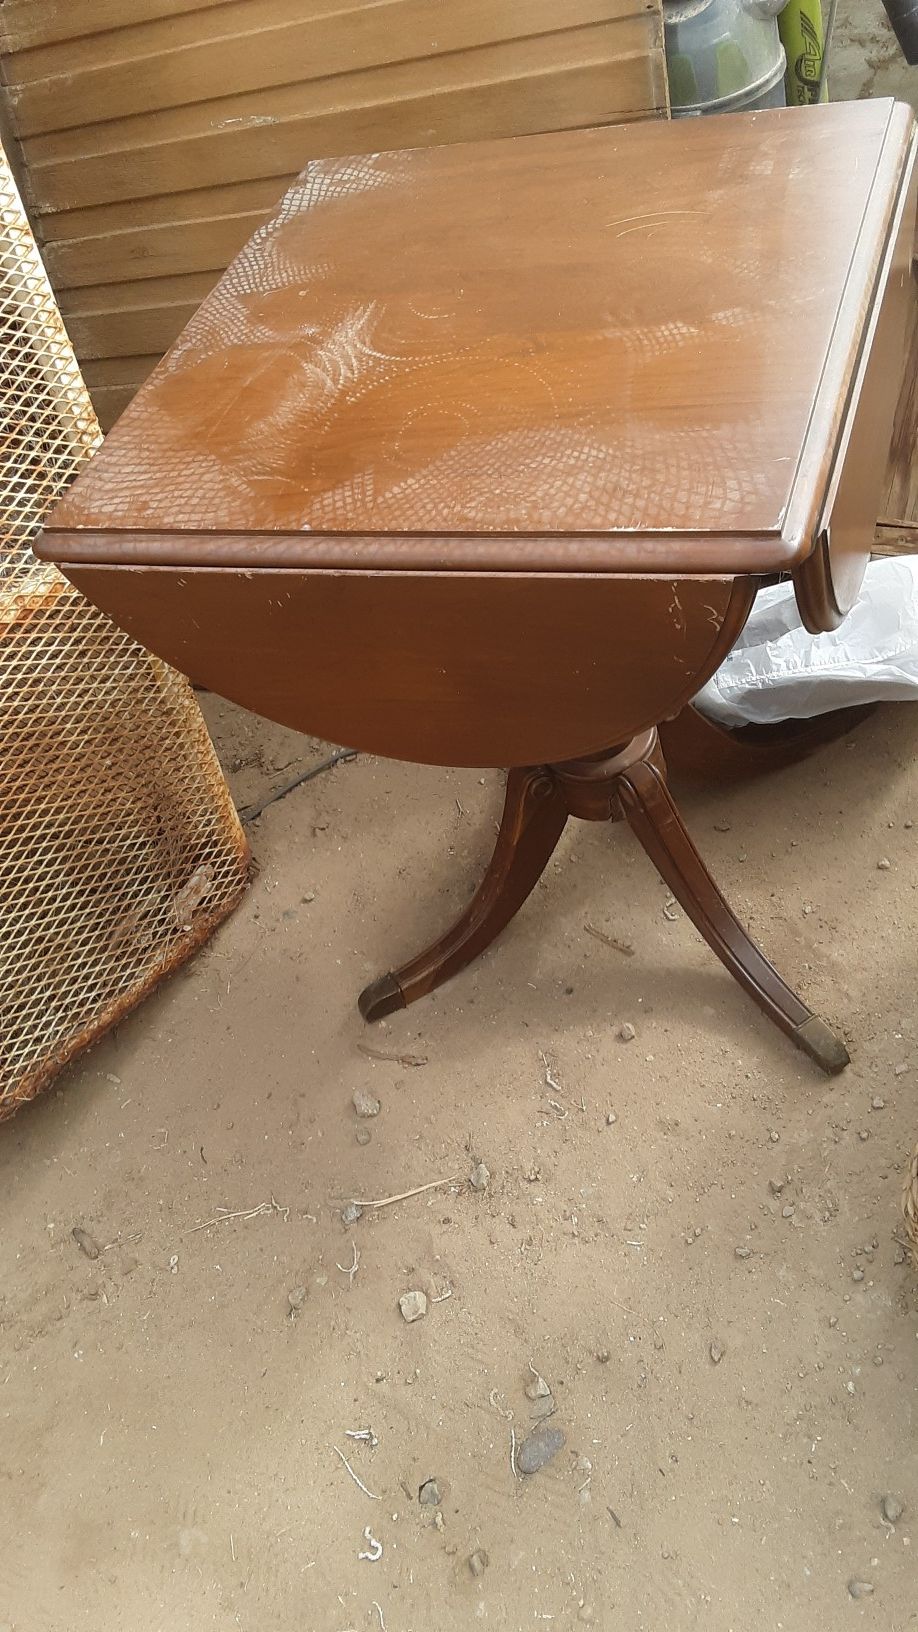 ANTIQUE SMALL DROP LEAF TABLE diy project